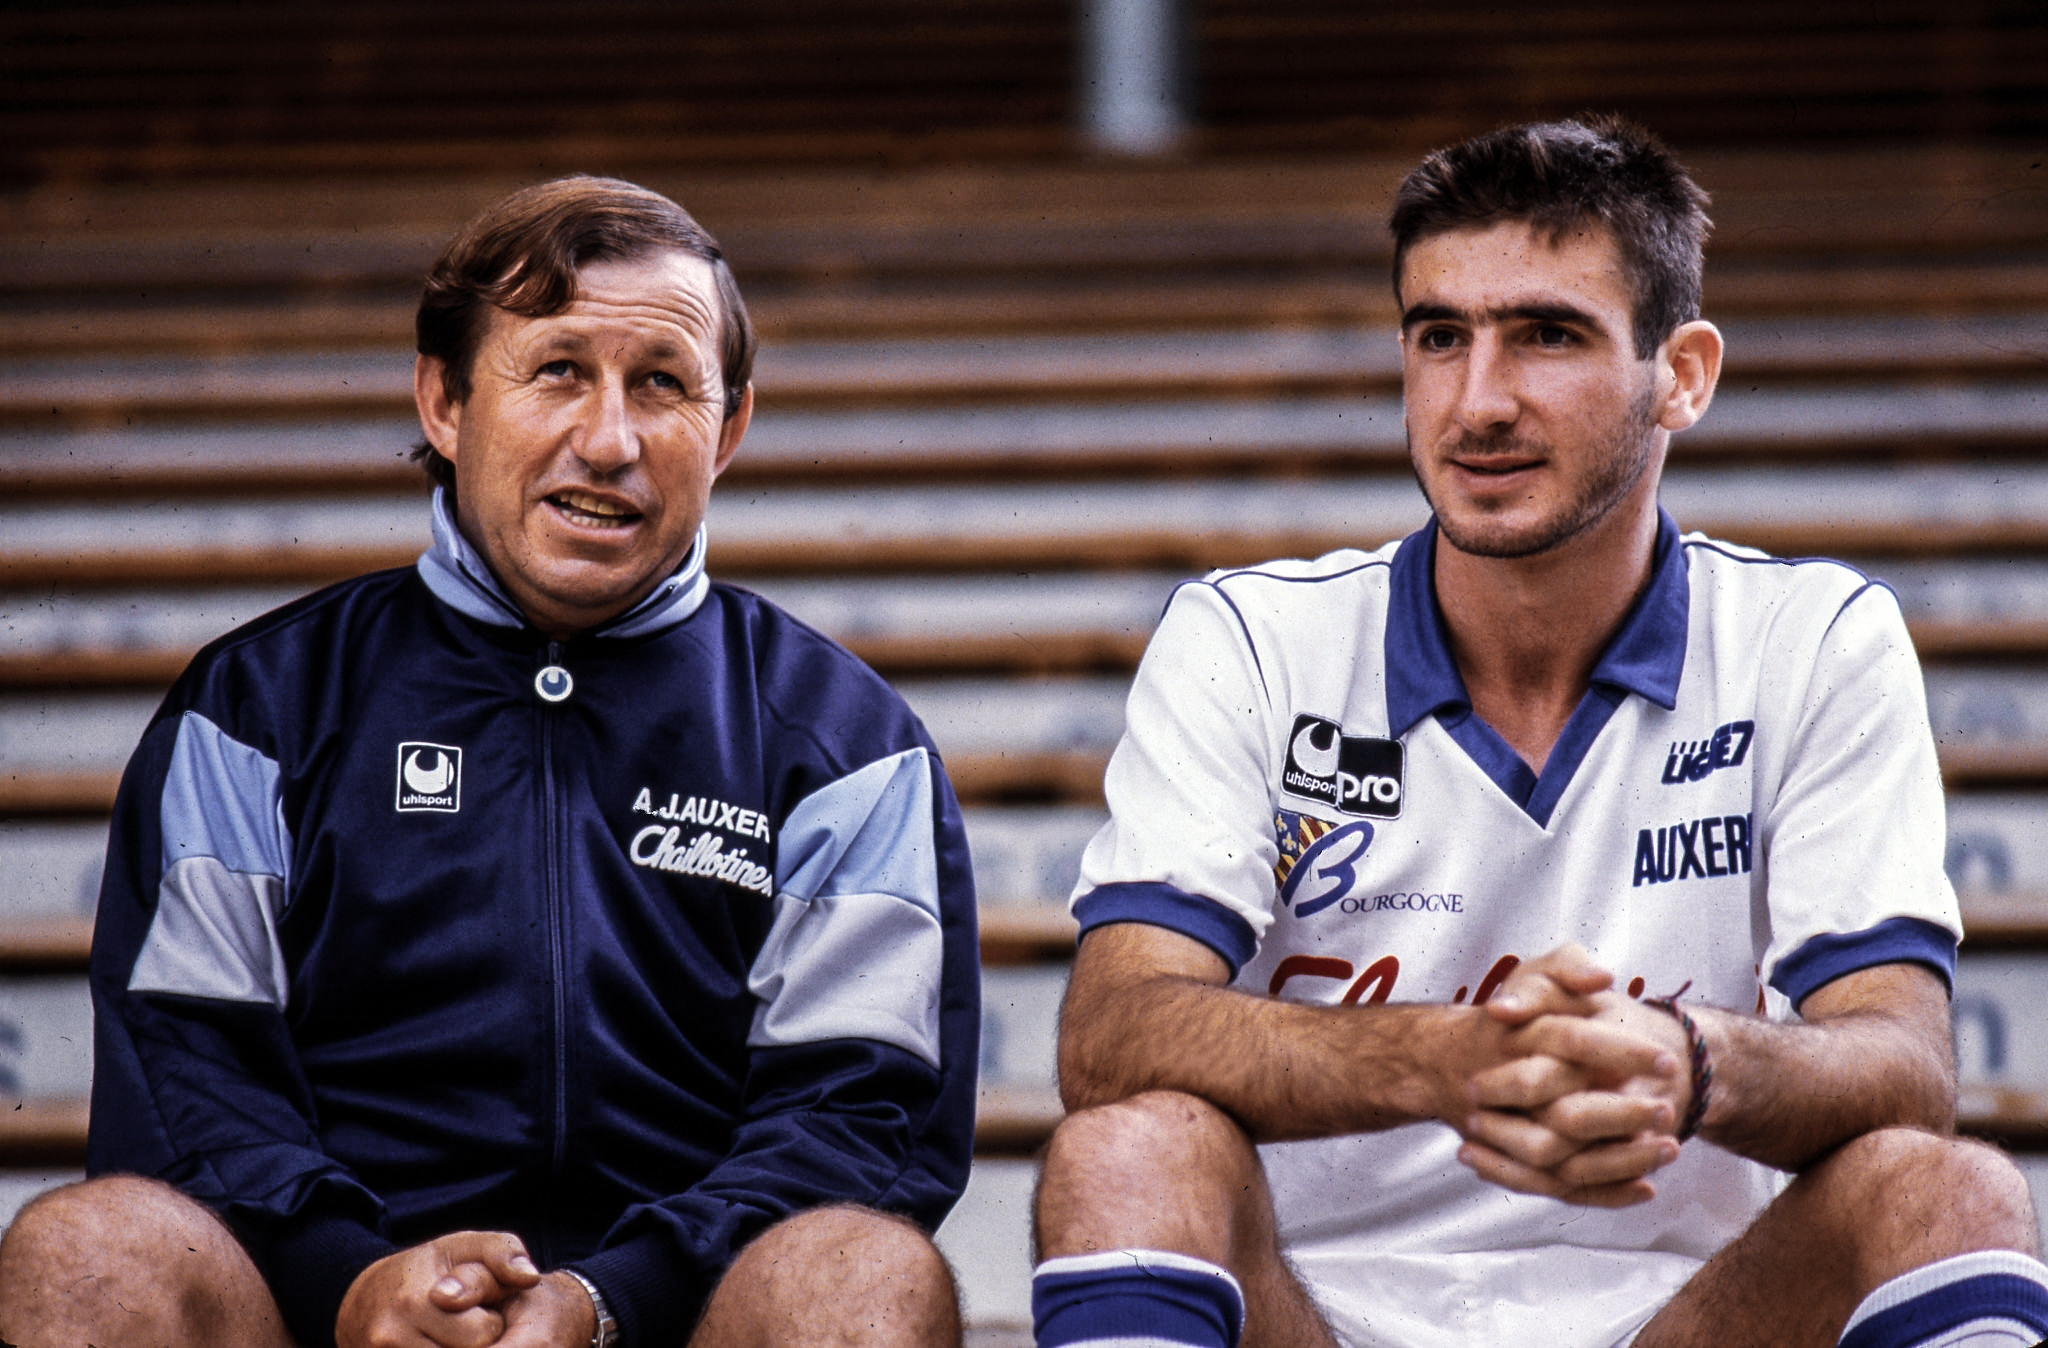 Scouted Football on Twitter: "Guy Roux and Eric Cantona at AJ Auxerre.  https://t.co/oc2Y3BLEpa" / Twitter